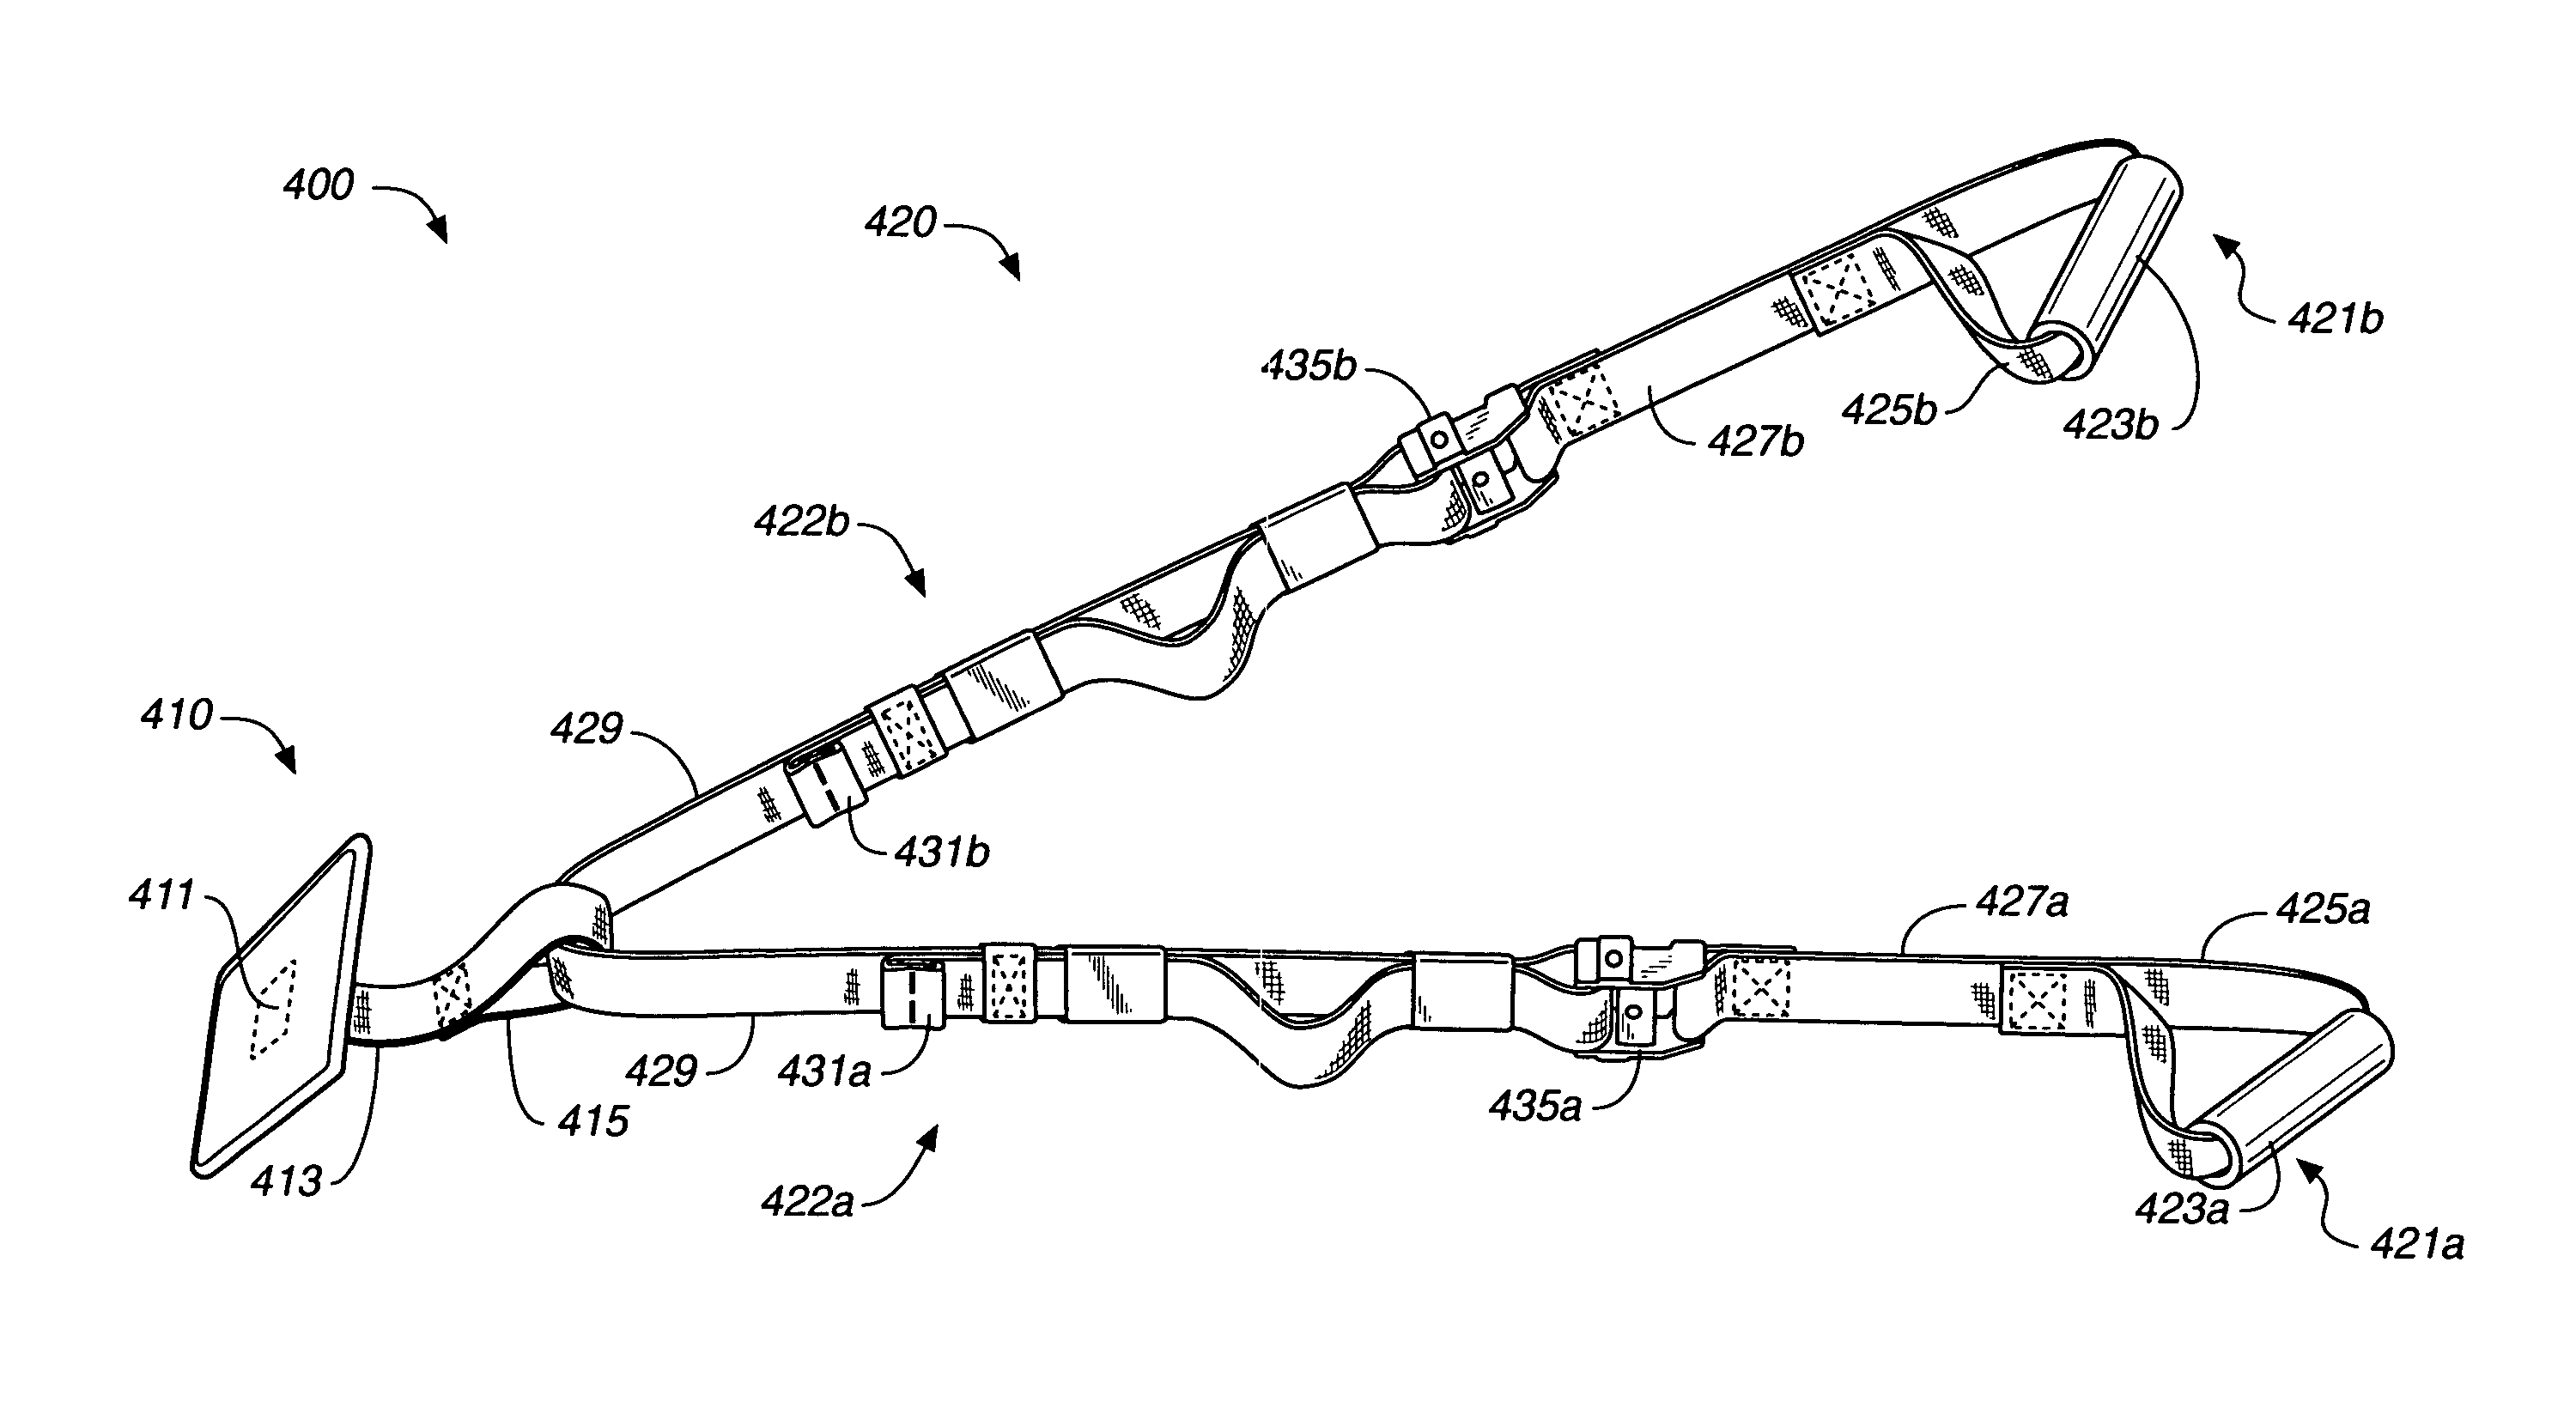 Exercise device including adjustable, inelastic straps